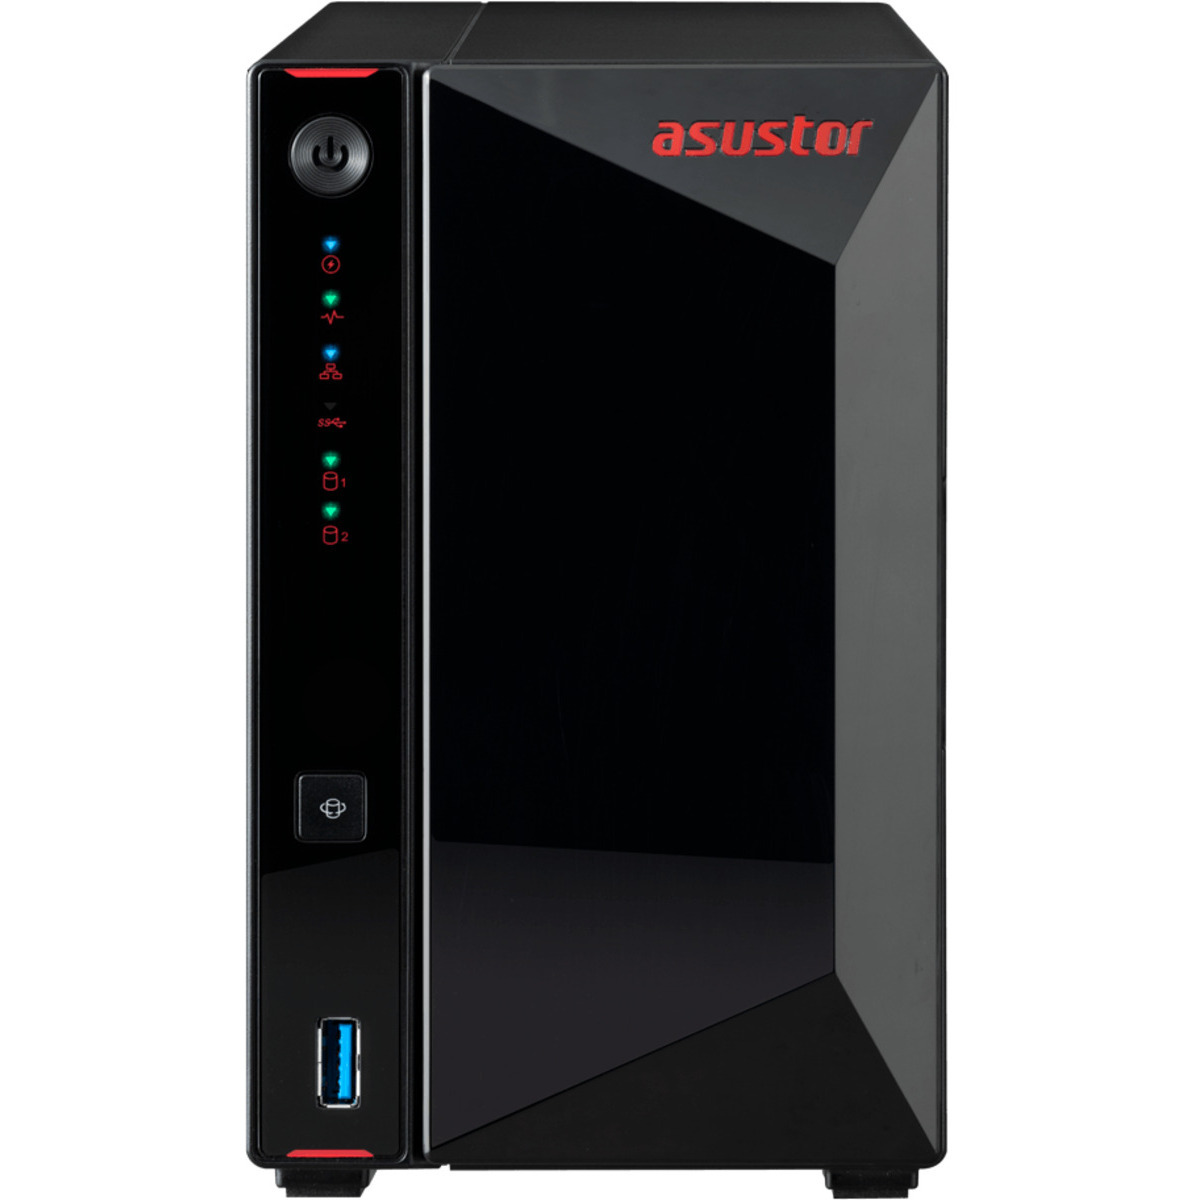 buy $1021 ASUSTOR AS5202T Nimbustor 32tb Desktop NAS - Network Attached Storage Device 2x16000gb Western Digital Red Pro WD161KFGX 3.5 7200rpm SATA 6Gb/s HDD NAS Class Drives Installed - Burn-In Tested - FREE RAM UPGRADE - nas headquarters buy network attached storage server device das new raid-5 free shipping usa AS5202T Nimbustor